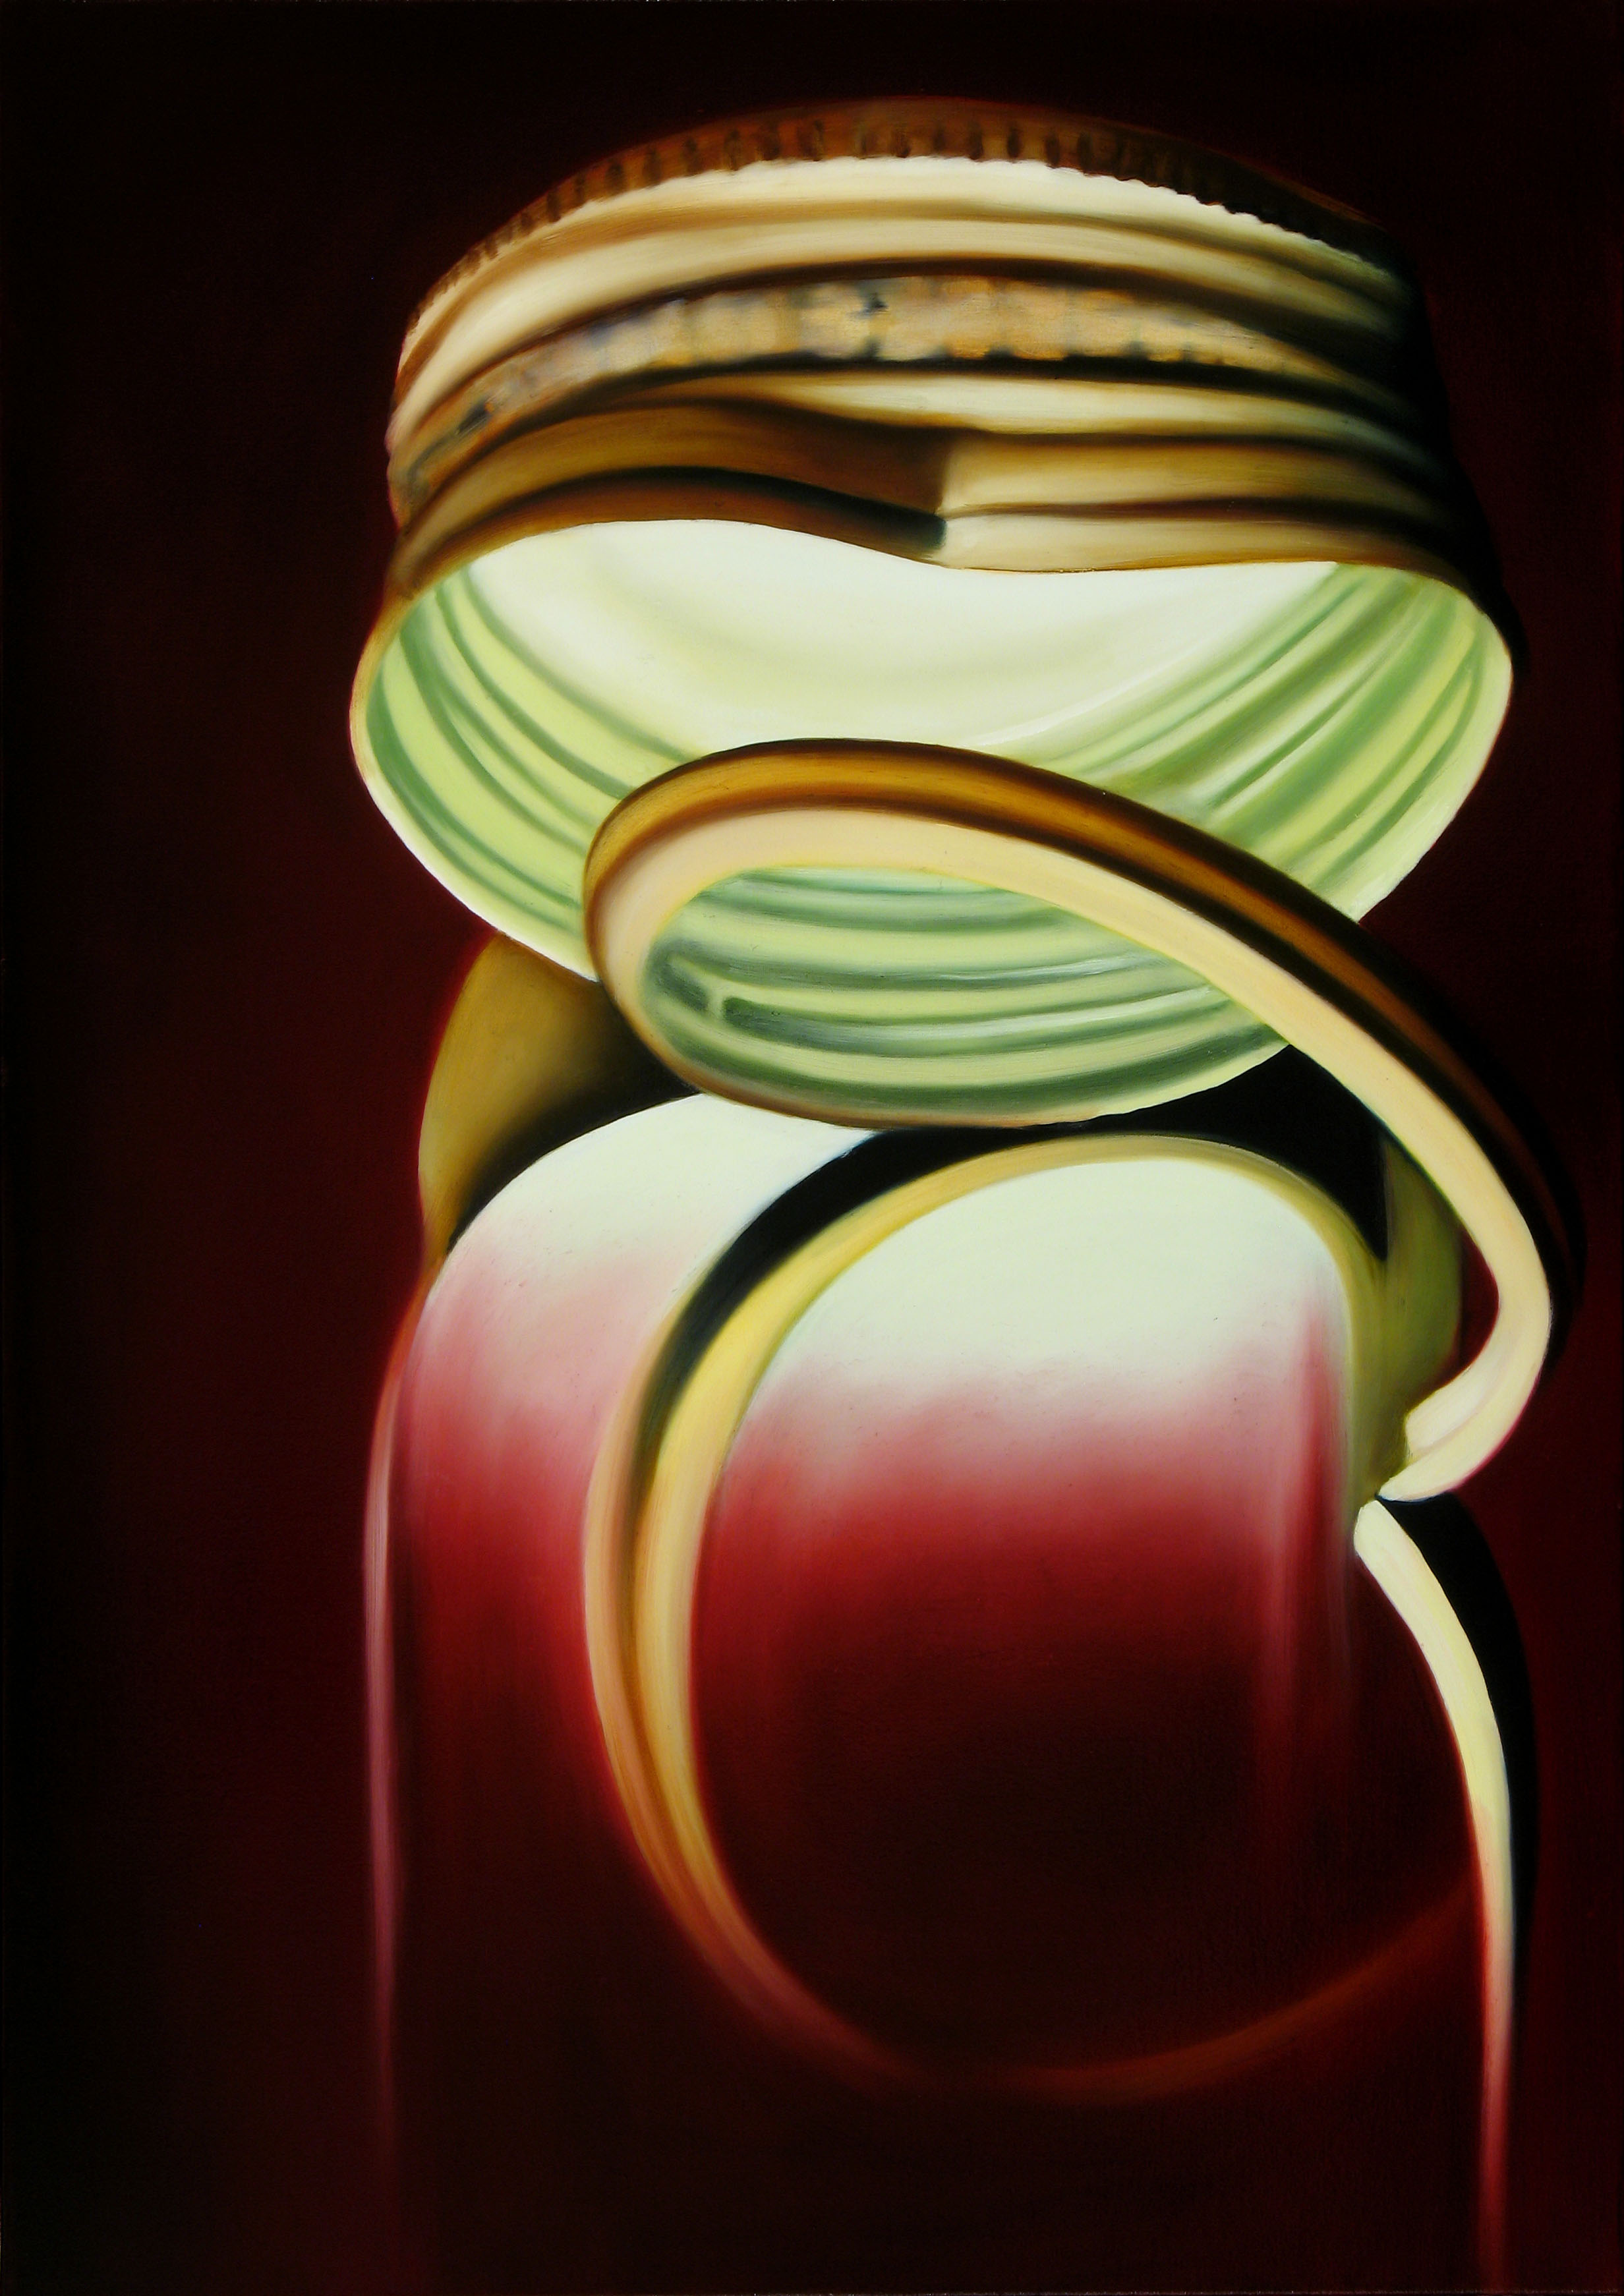 In His Cups, 34" x 24", Oil on Canvas, 2008